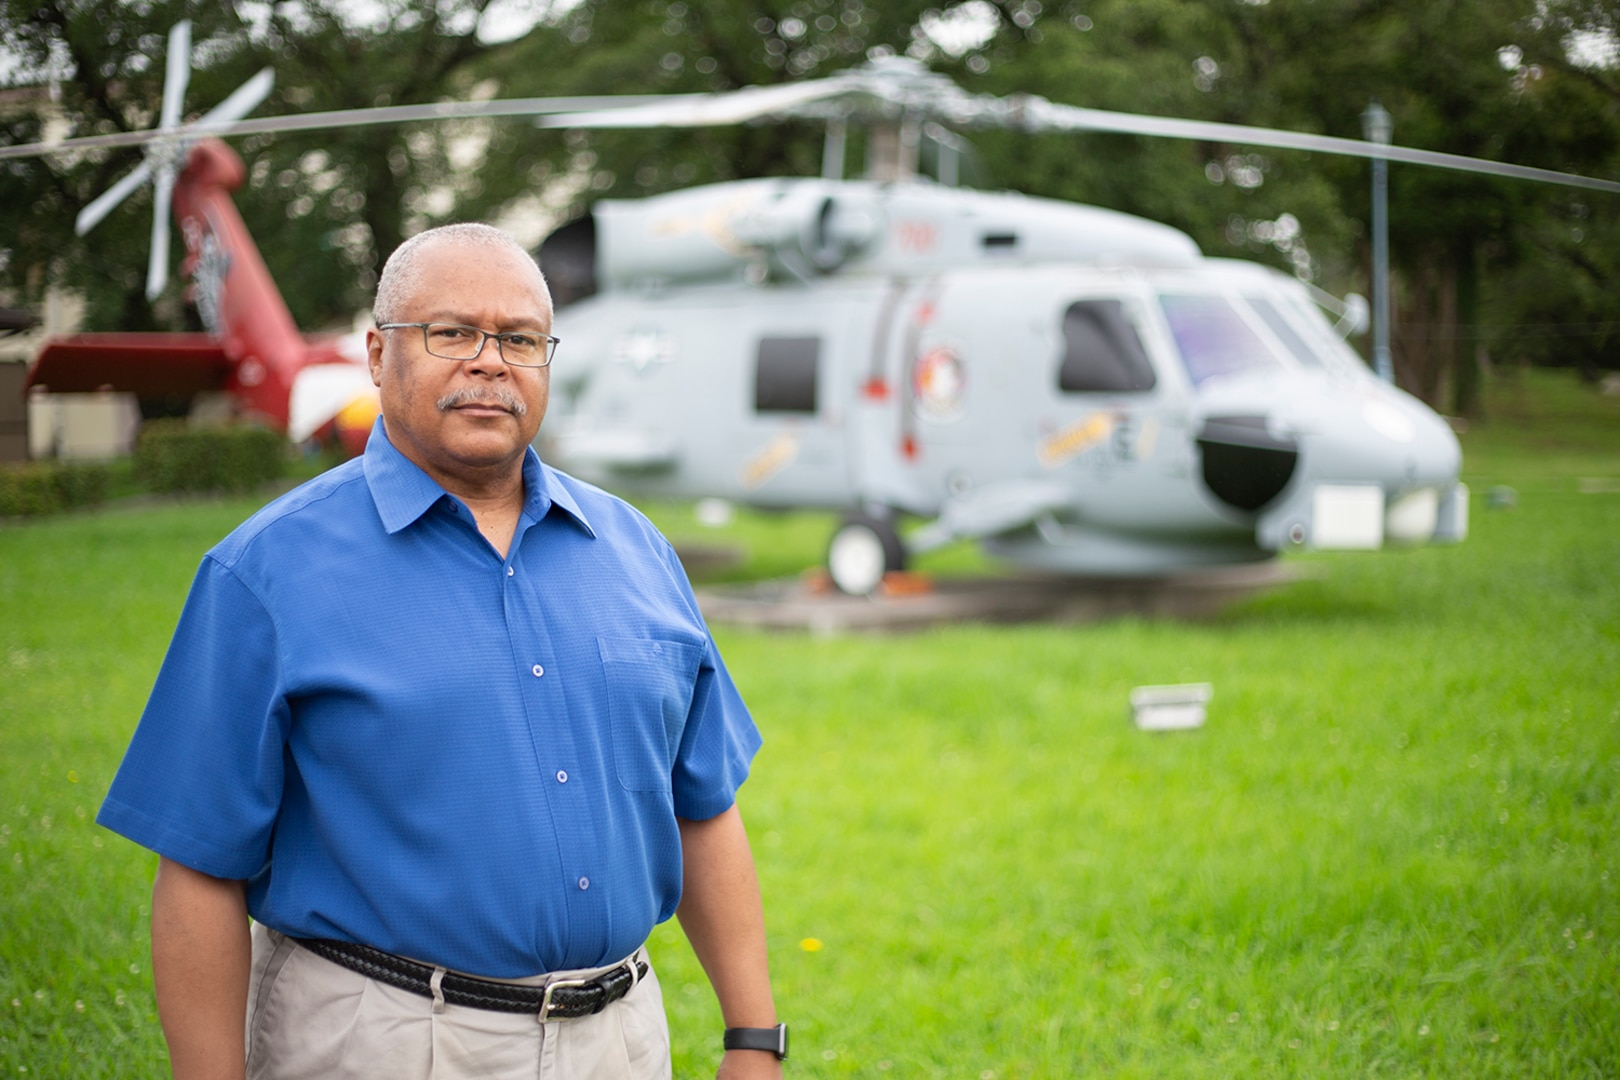 Man stands in front of helicopter.